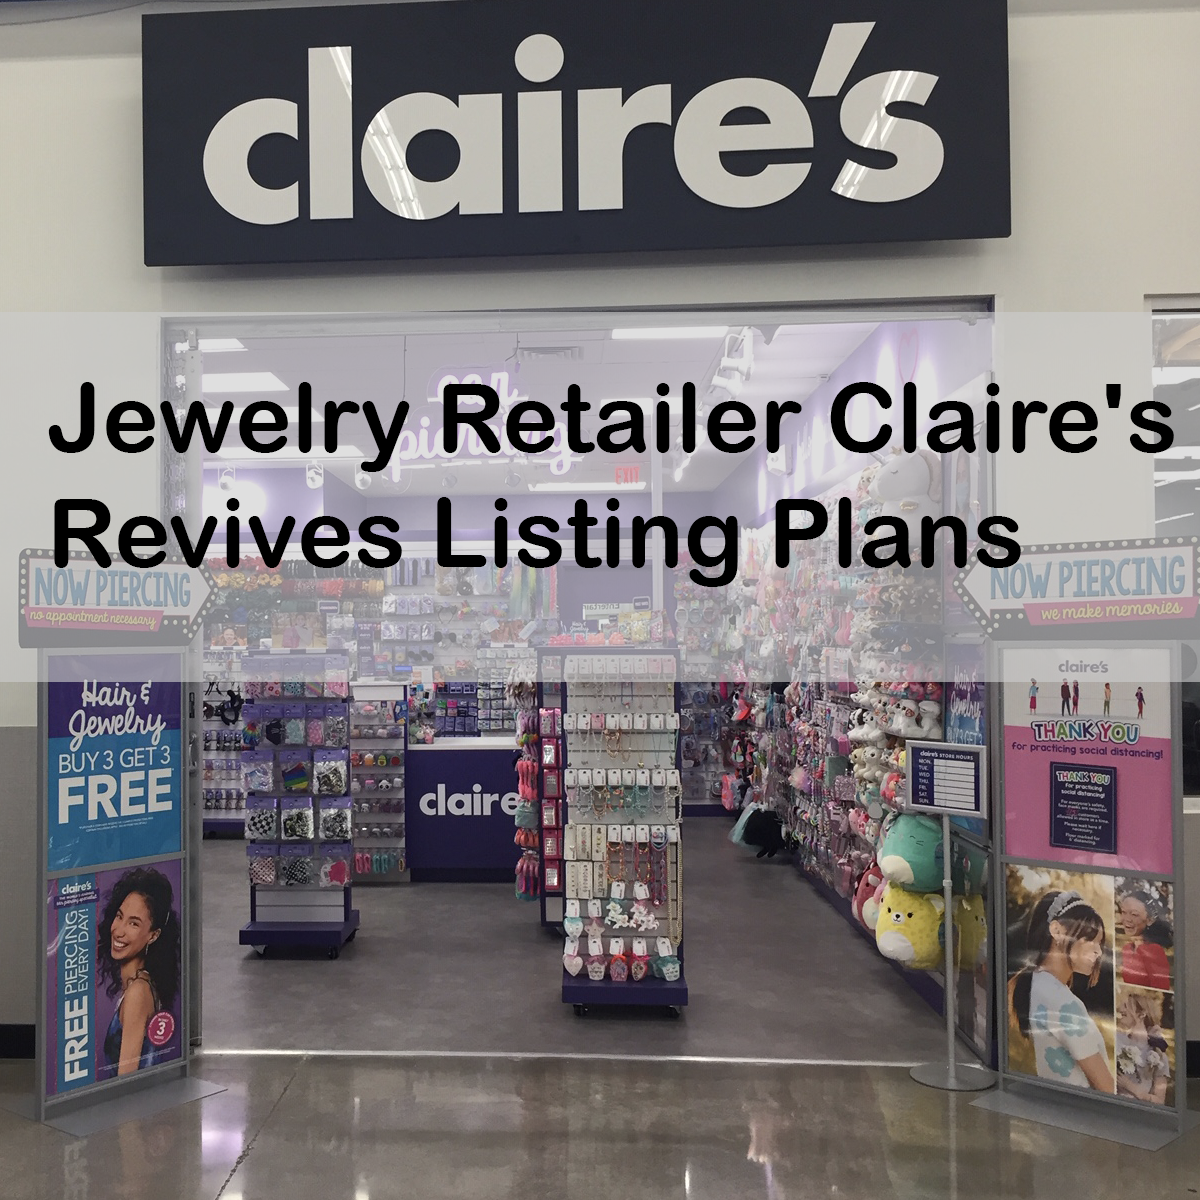 Jewelry Retailer Claire's Revives listing plans